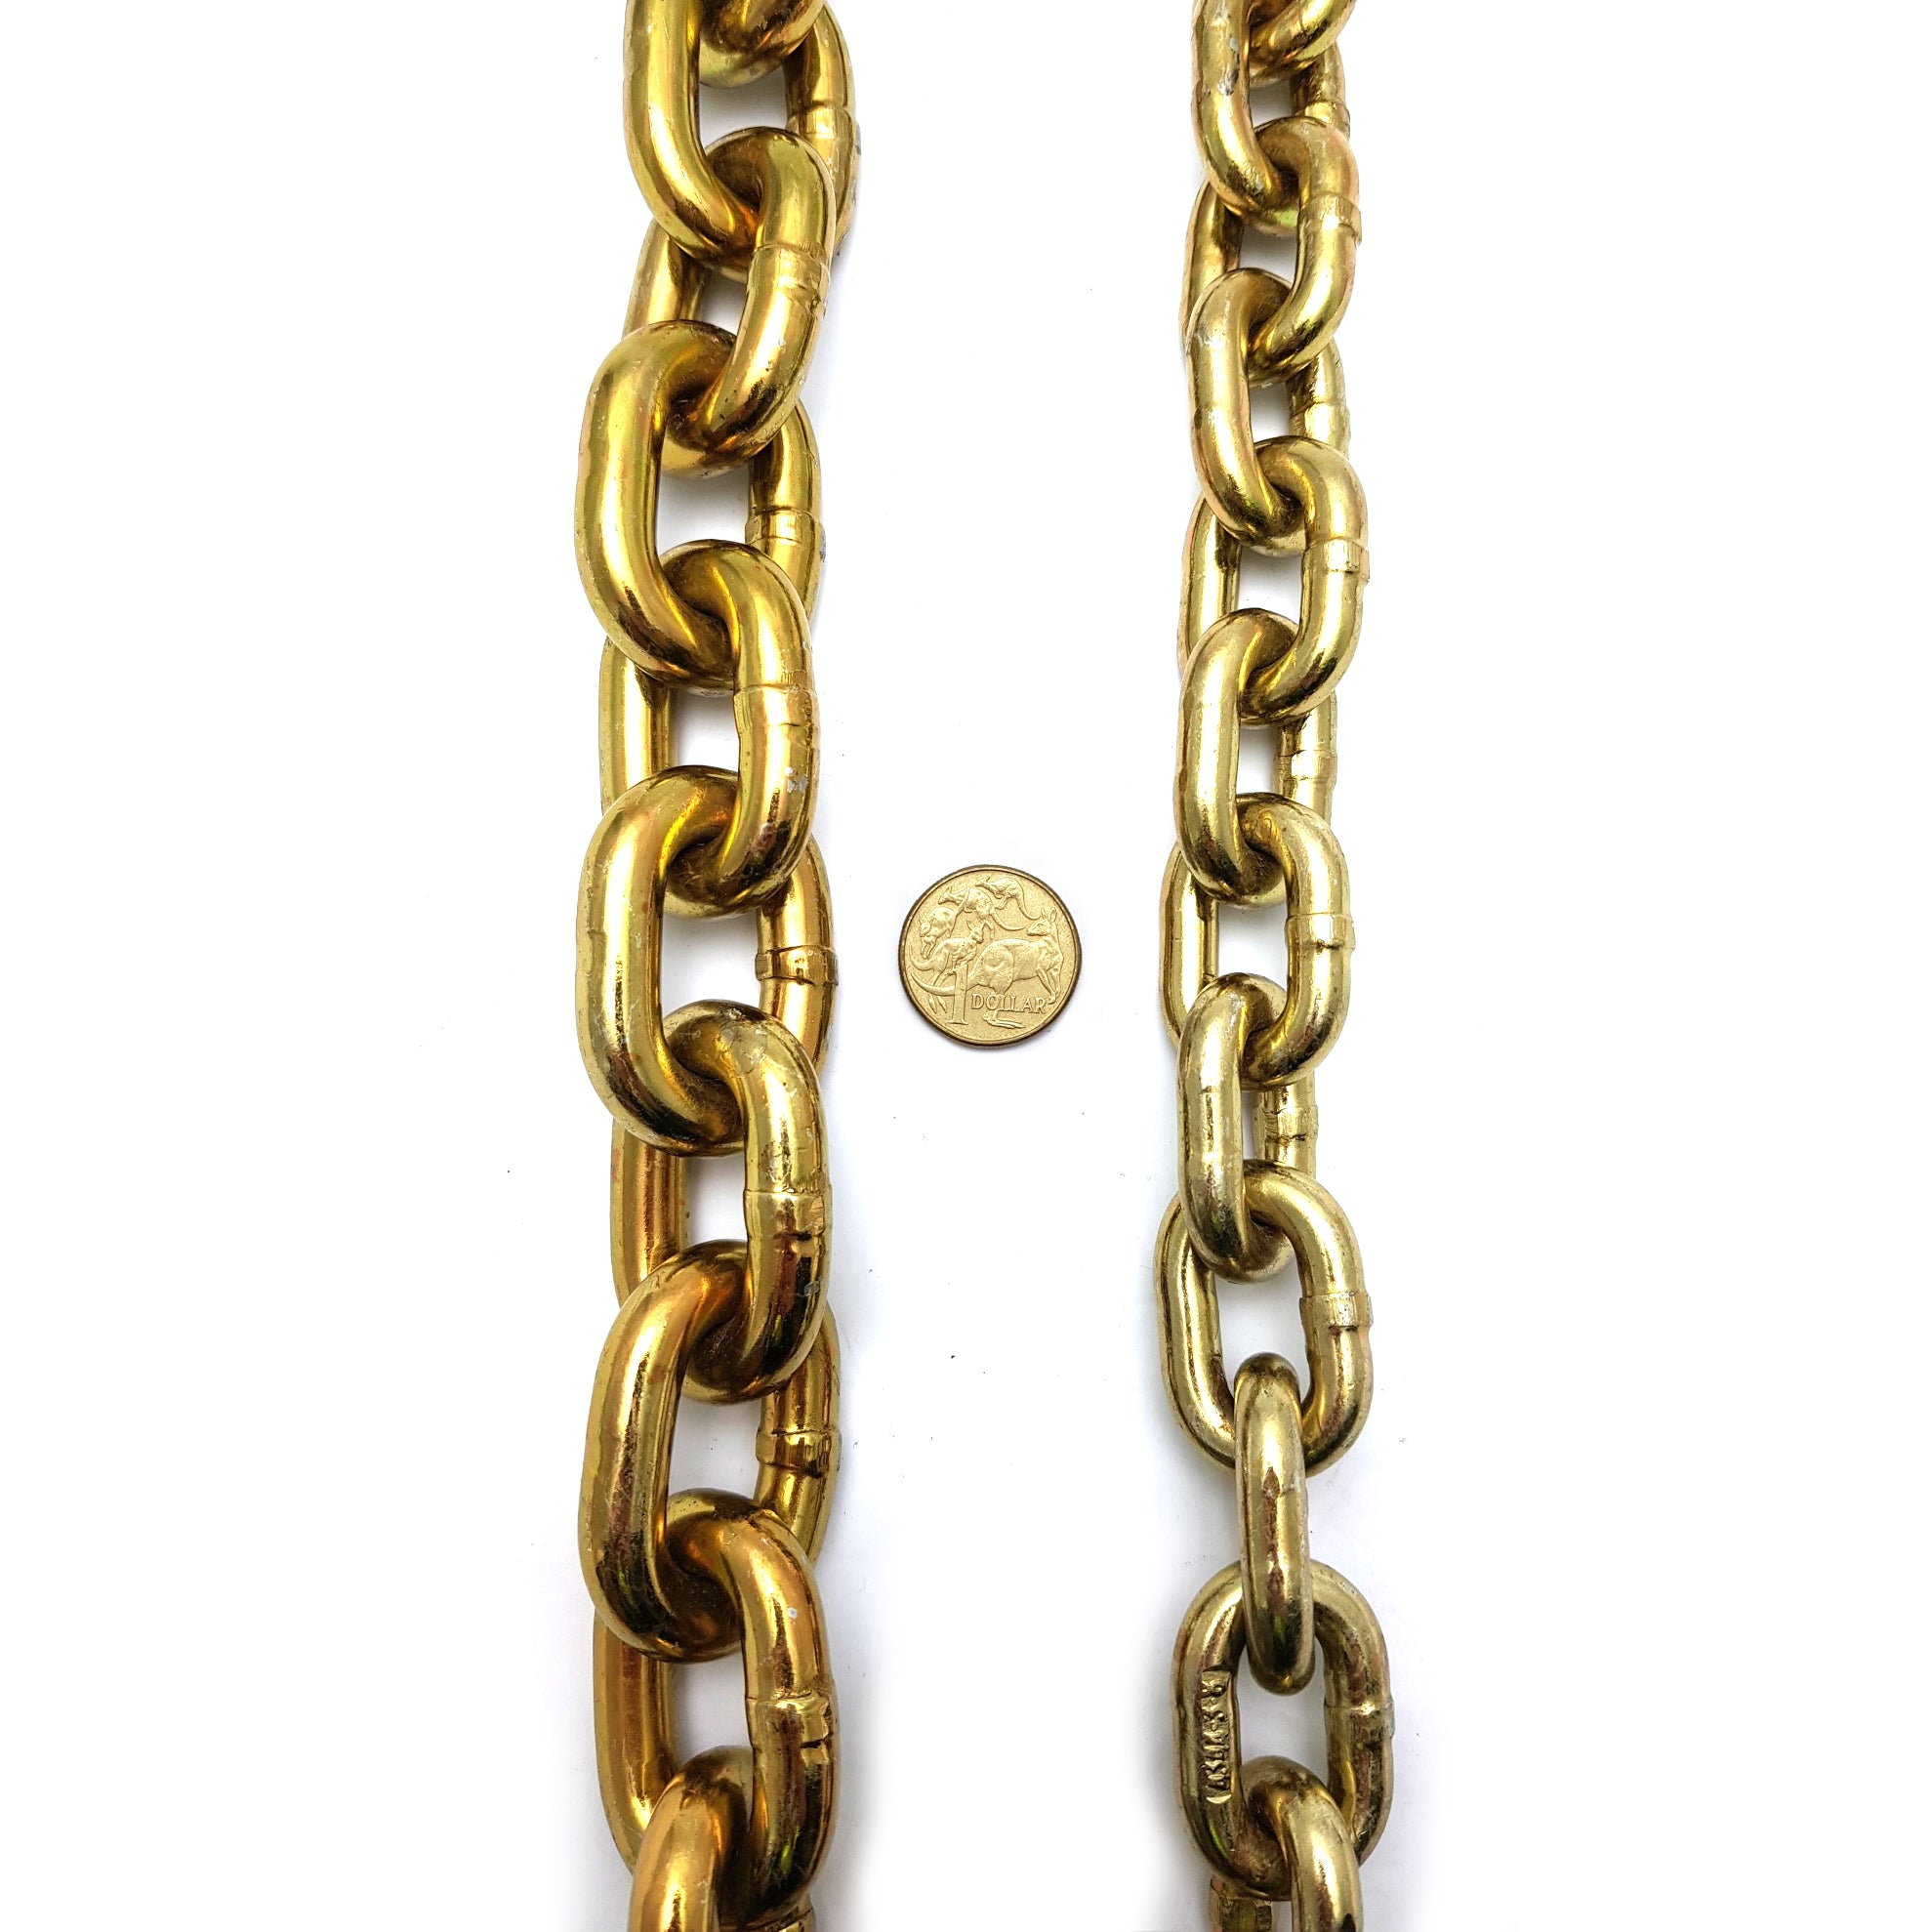 Hardened security chain, size: 8mm & 10mm, order two metres. Australia wide delivery